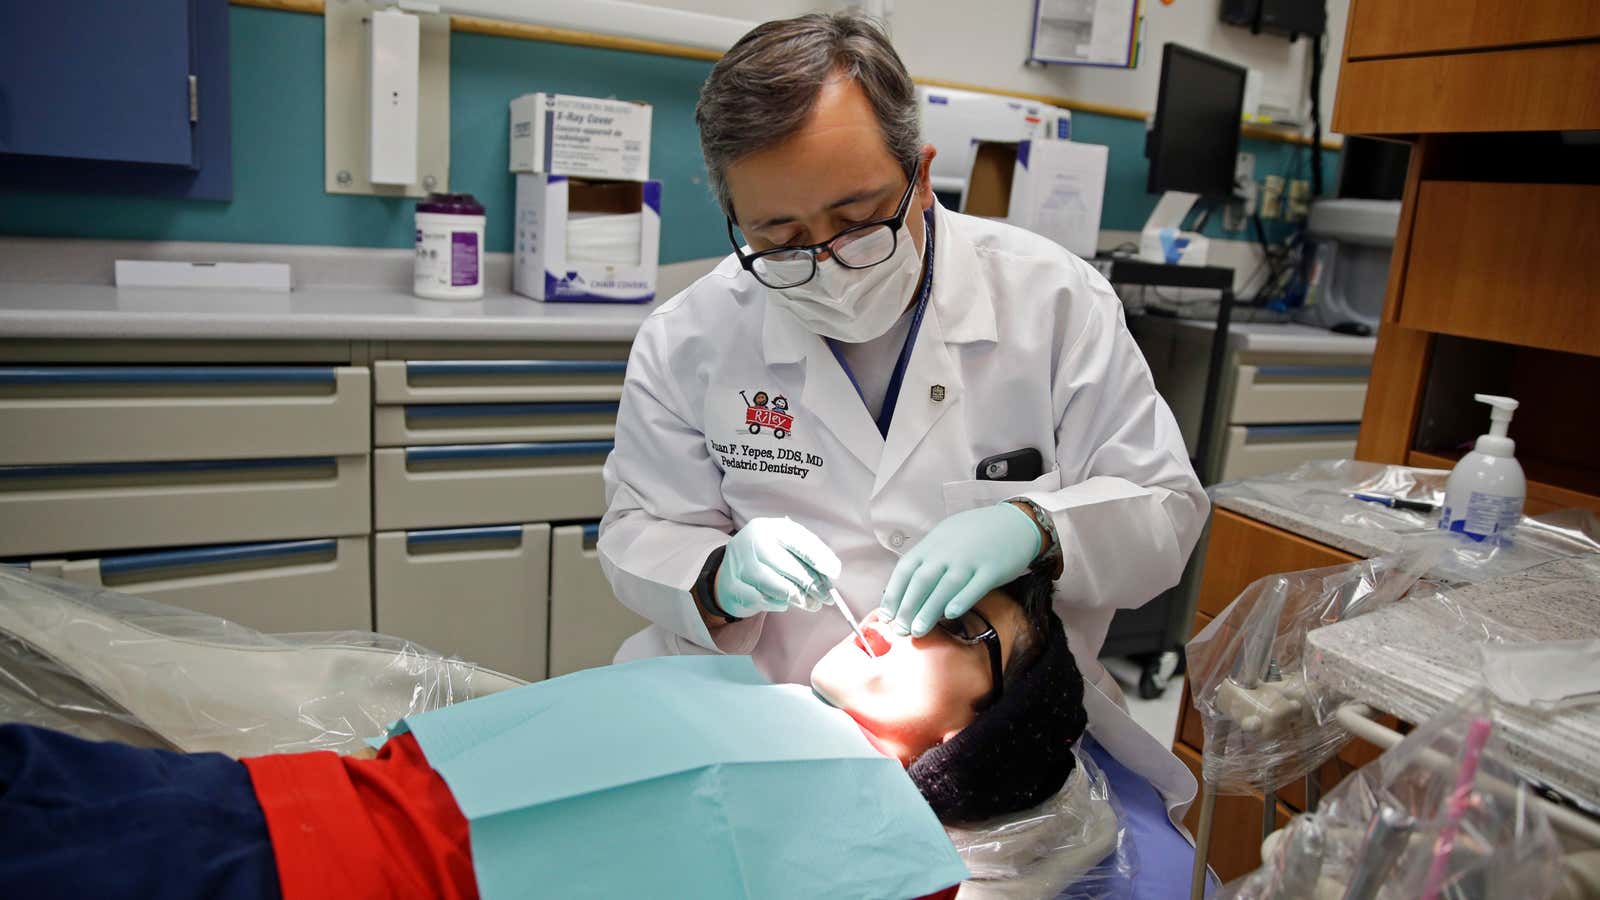 37 million children rely on dental care paid for by Medicaid.